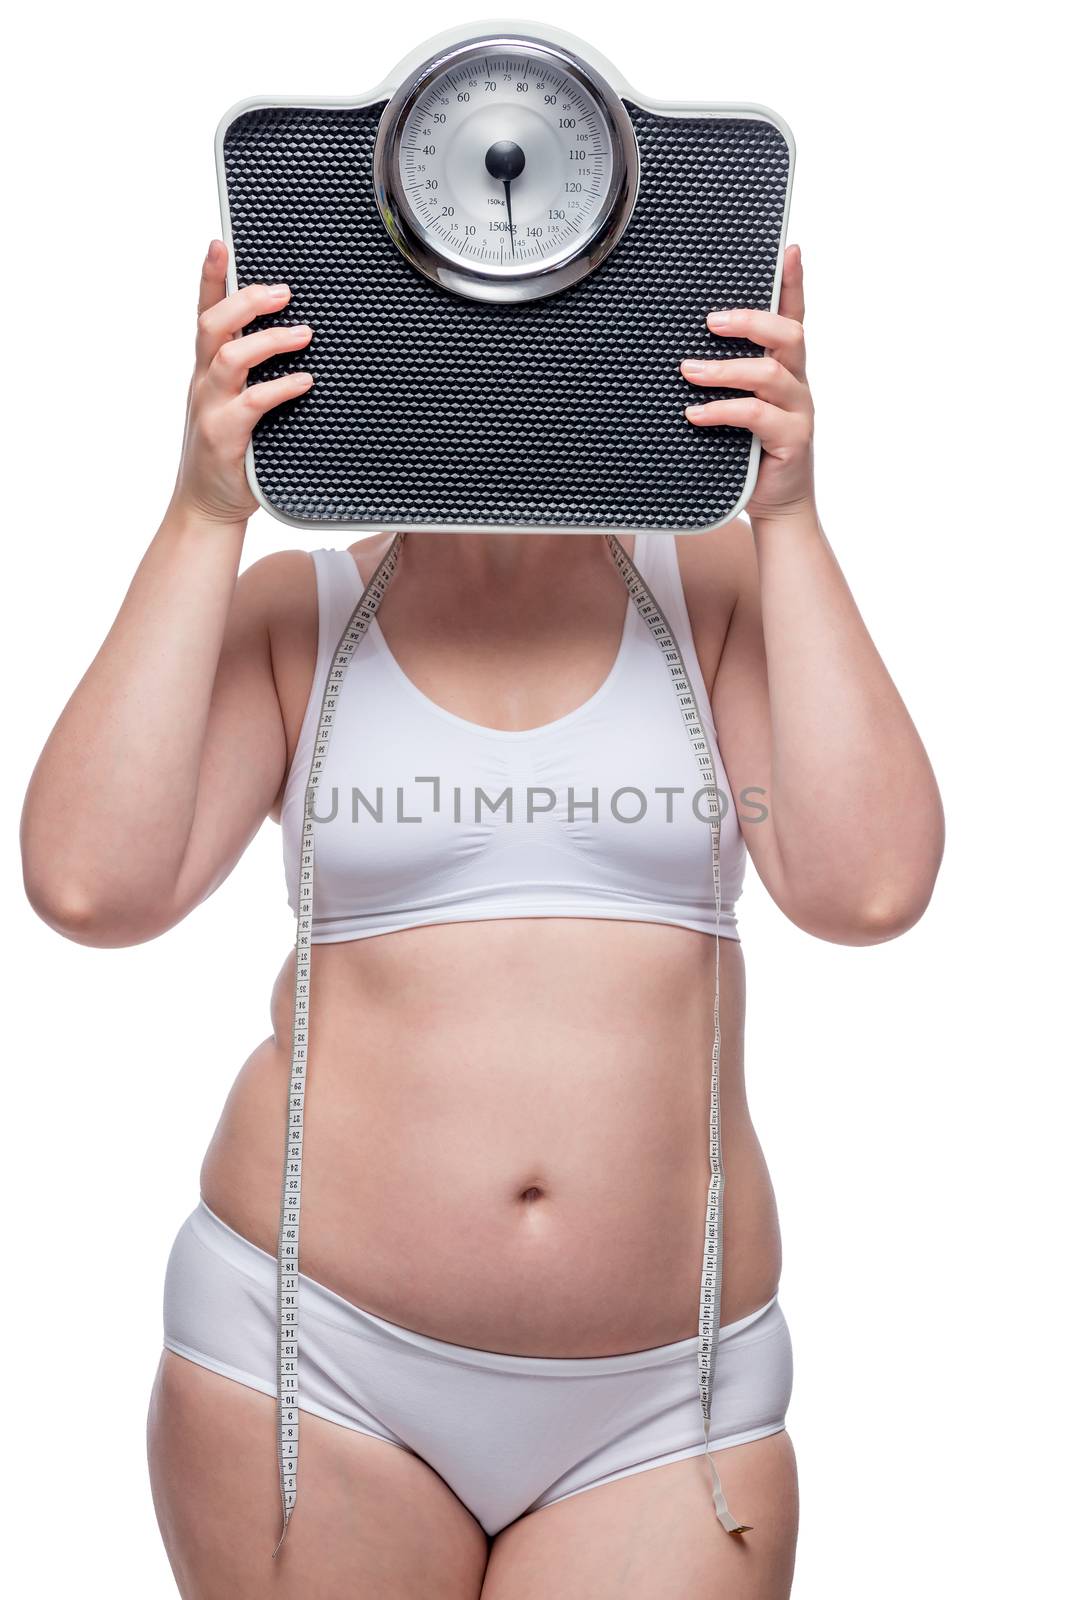 fat woman in underwear covers her face with scales, portrait is isolated